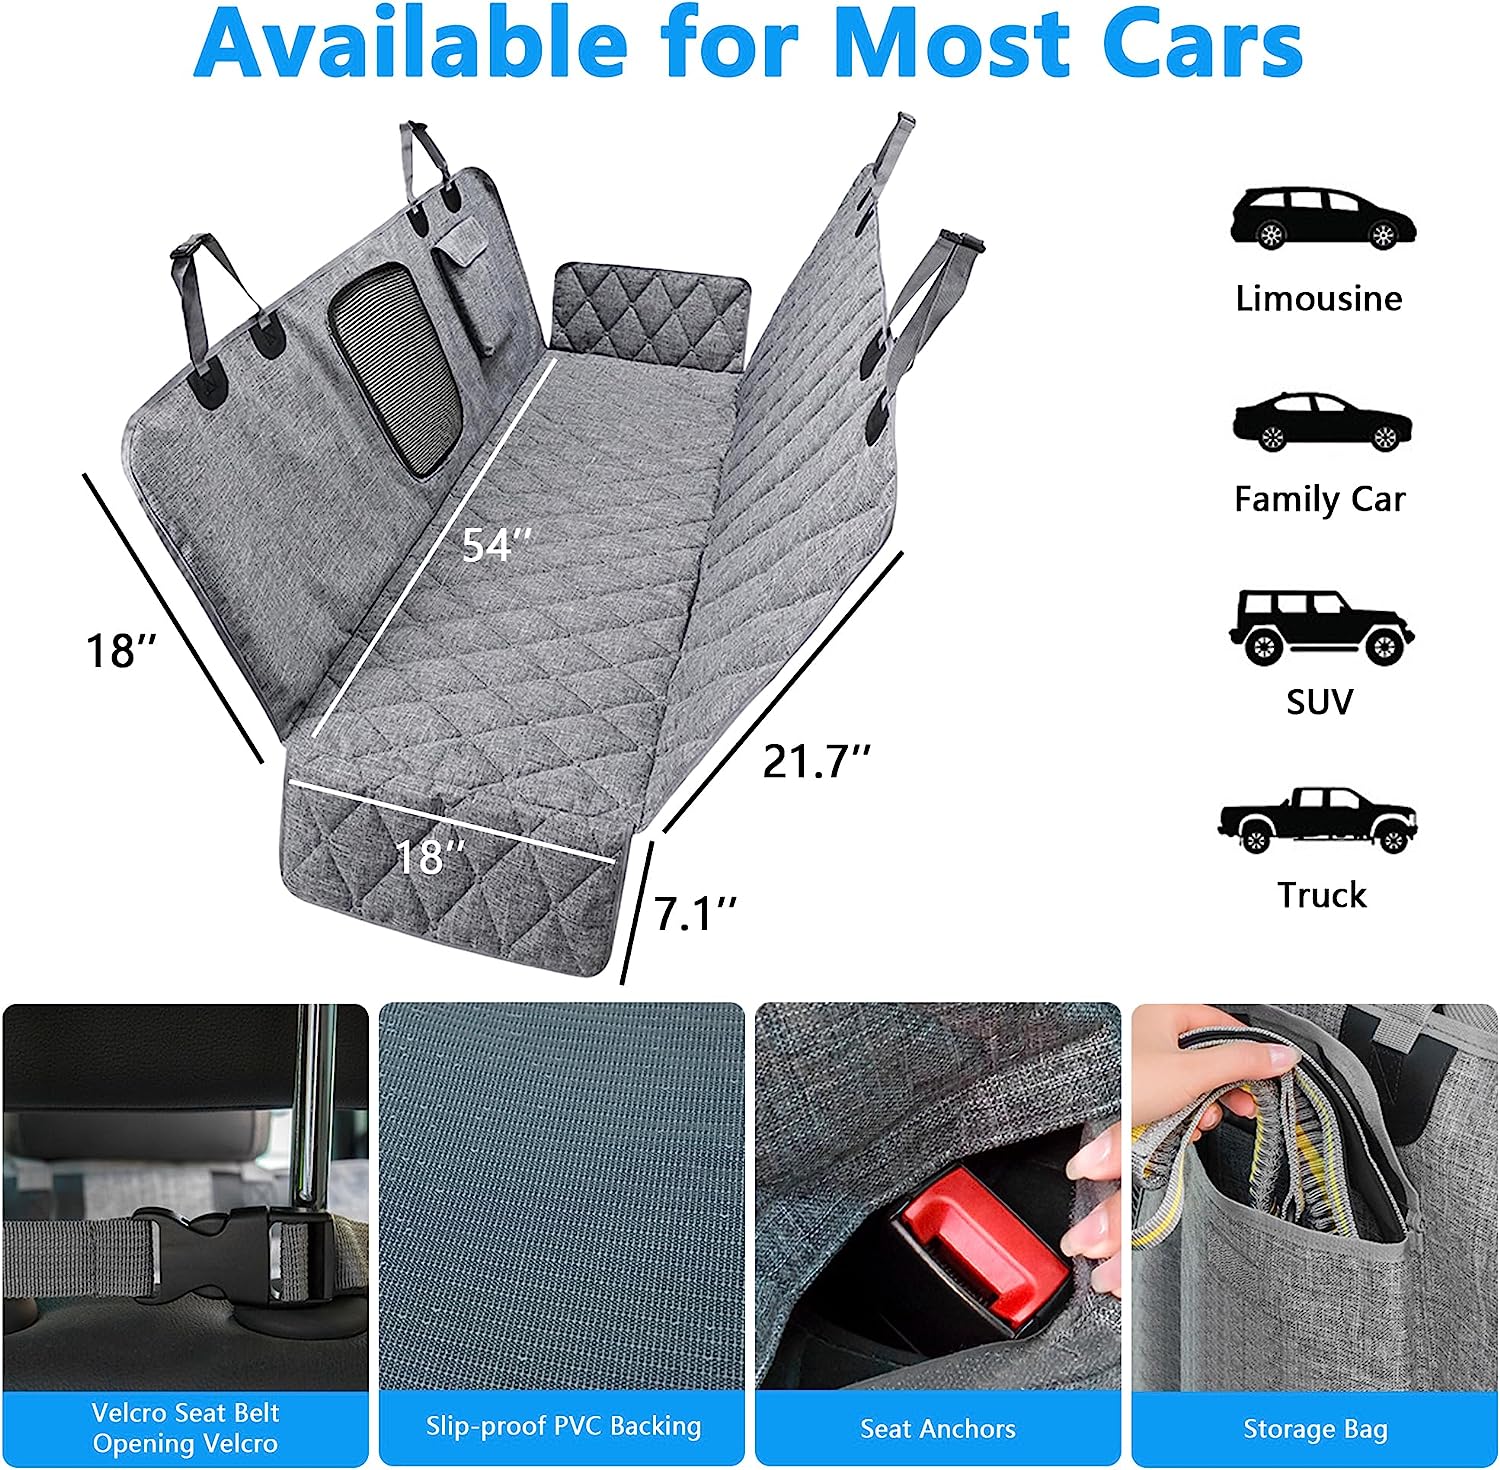 (Out of Stock) 5-in-1 Dog Car Seat Cover for Back Seat 600D Oxford Cloth Waterproof Pet Seat Cover Hammock Fit Most Cars, Trucks & SUVs